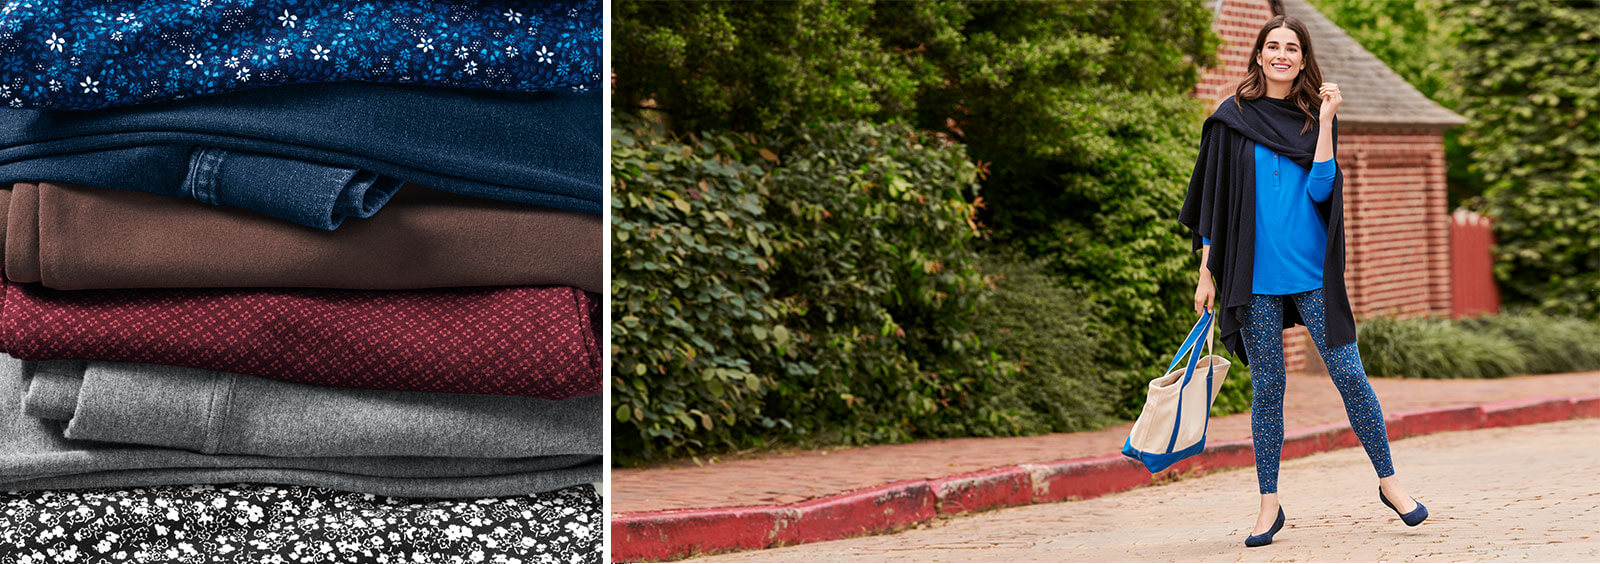 Workout Leggings vs. Everyday Leggings: Which is Better for You?